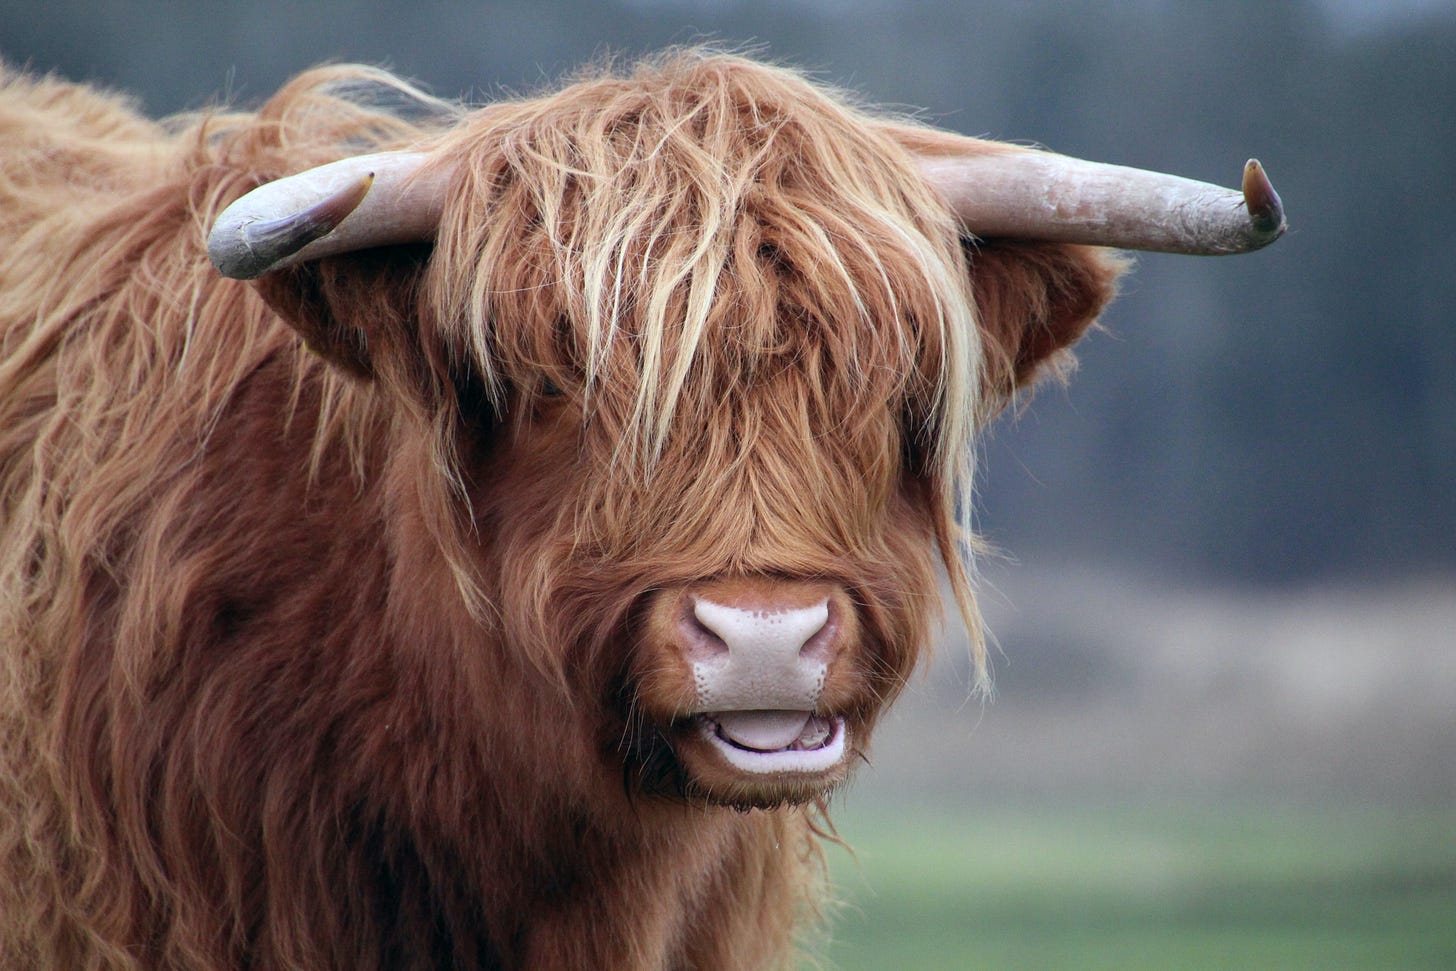 A highland cow, known for its shaggy mane of hair on the head, with its mouth open, making it look like it's talking